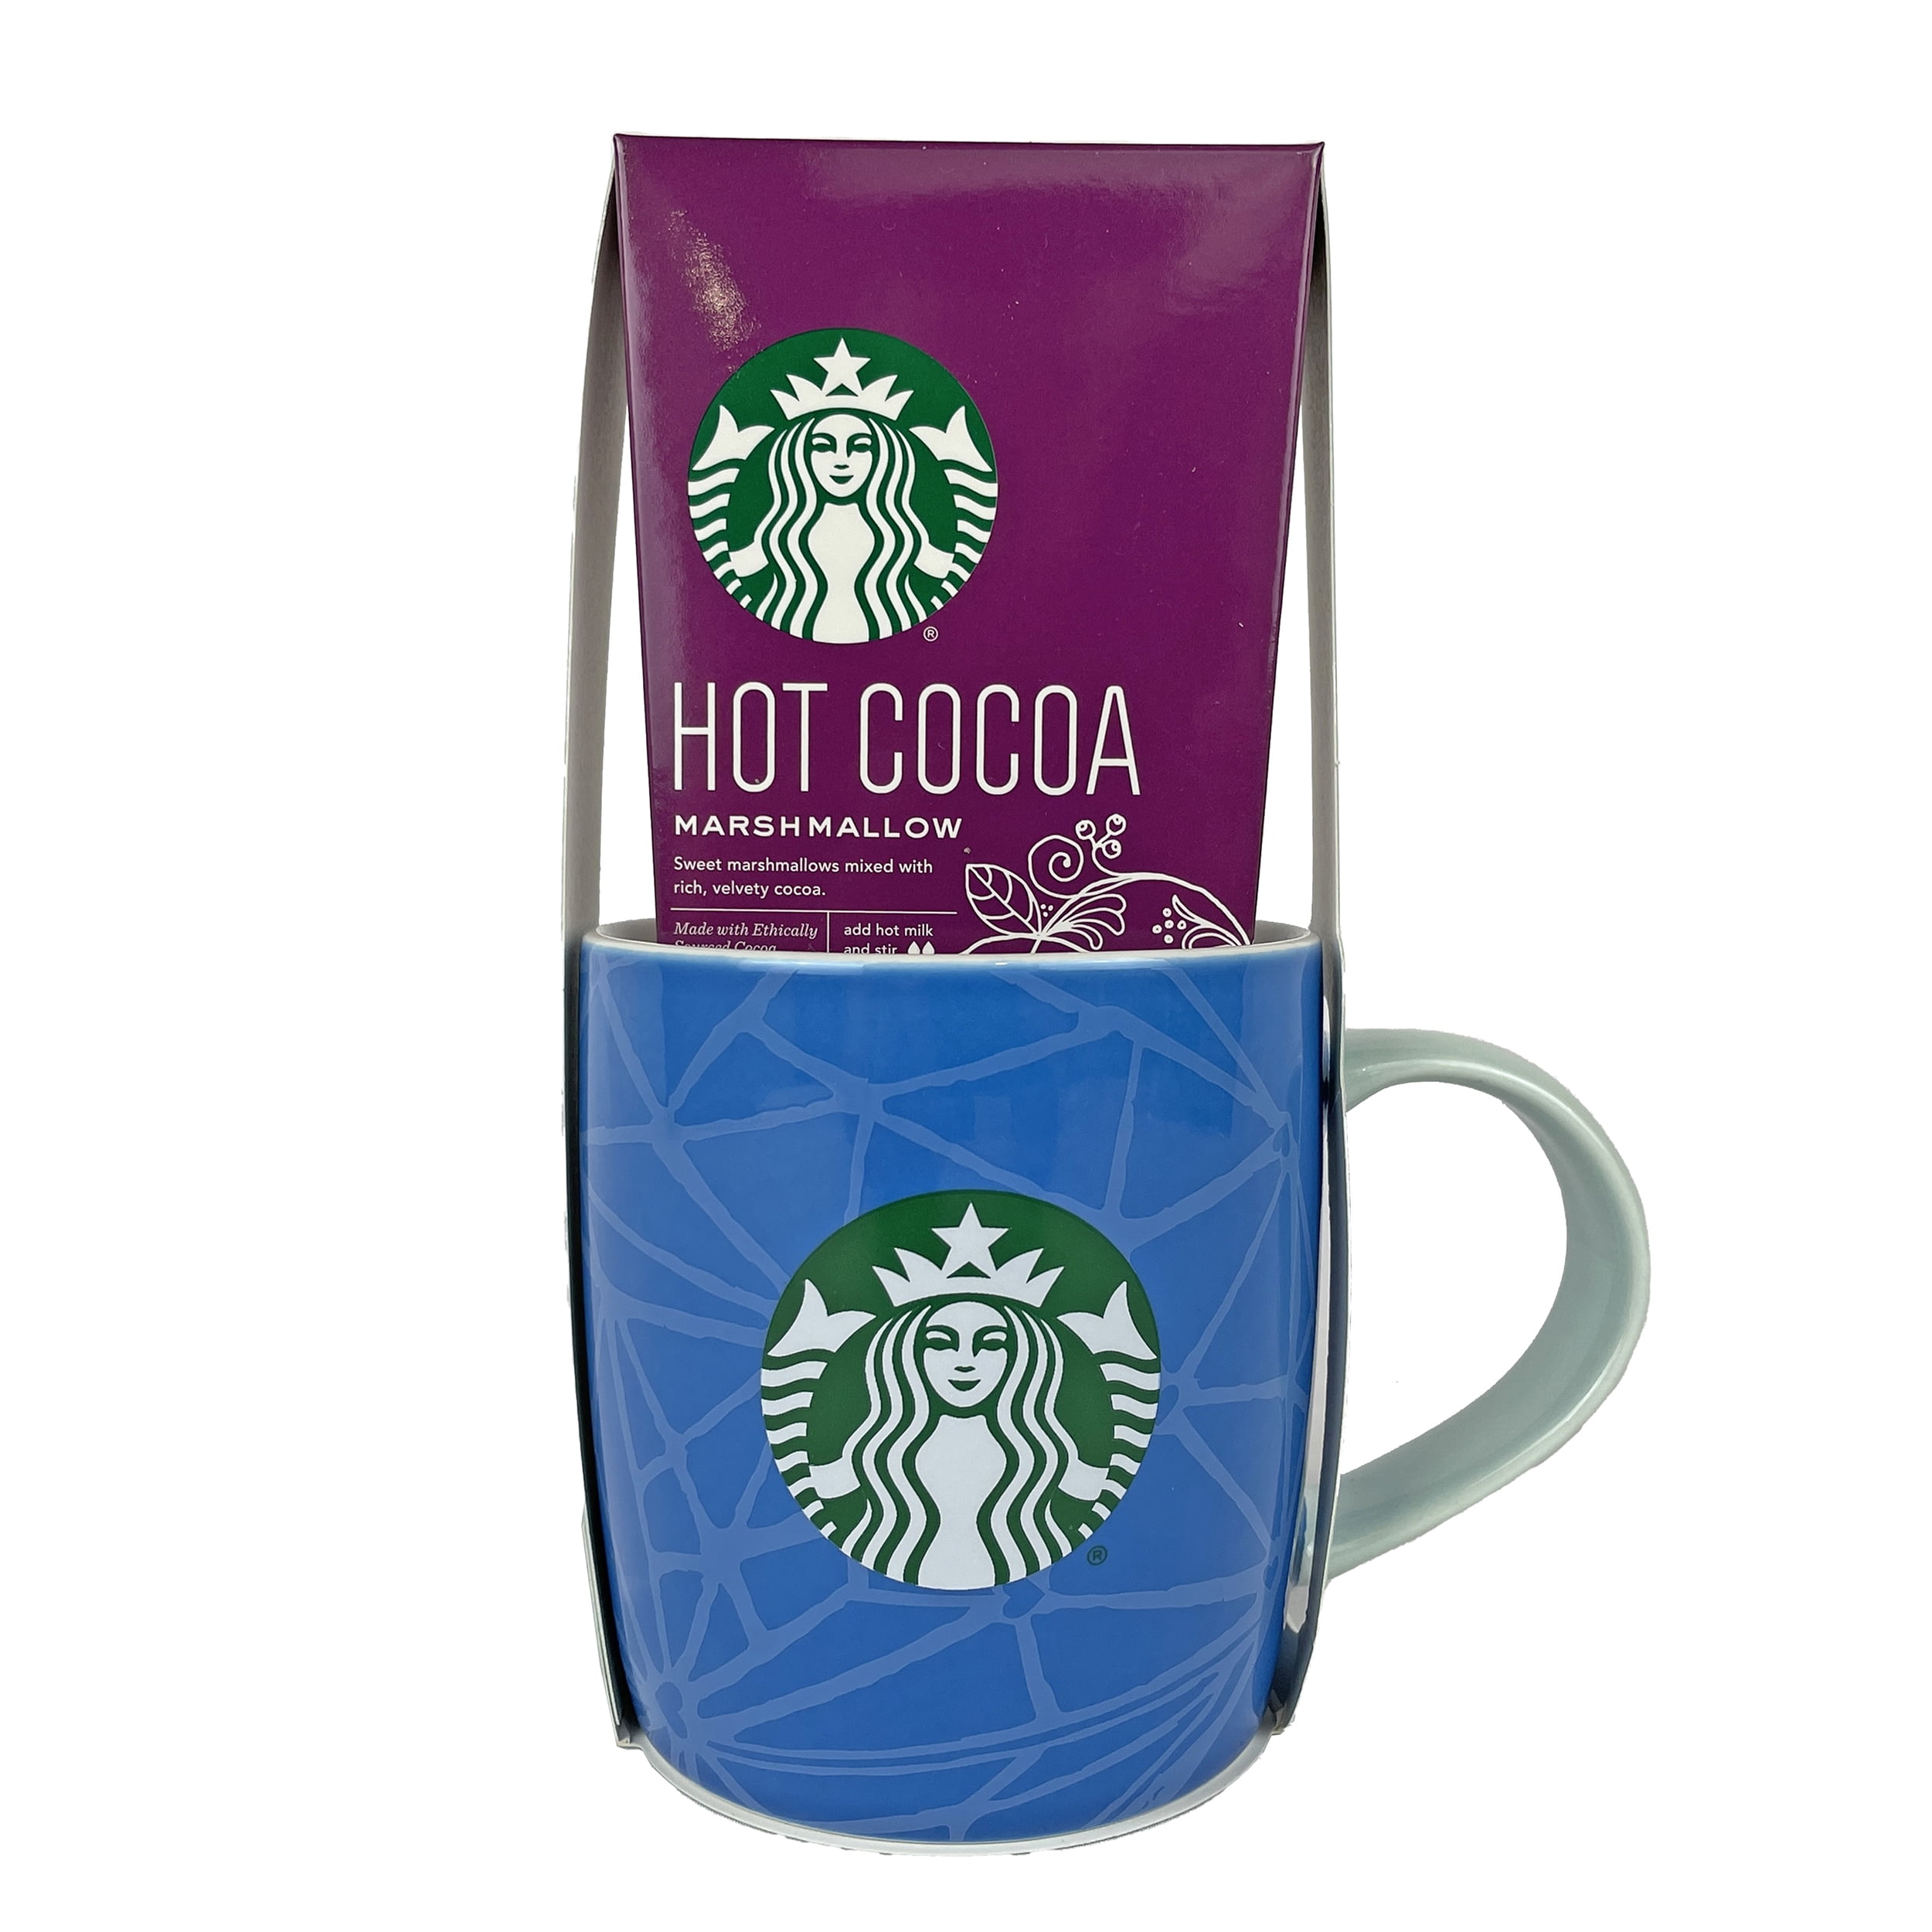 Gulland Orthodontics - It's time for another #GOod Monday Morning Giveaway!  Who loves Starbucks! Today's prize is a Starbucks mug and hot cocoa gift set.  Like, comment and tag a friend to